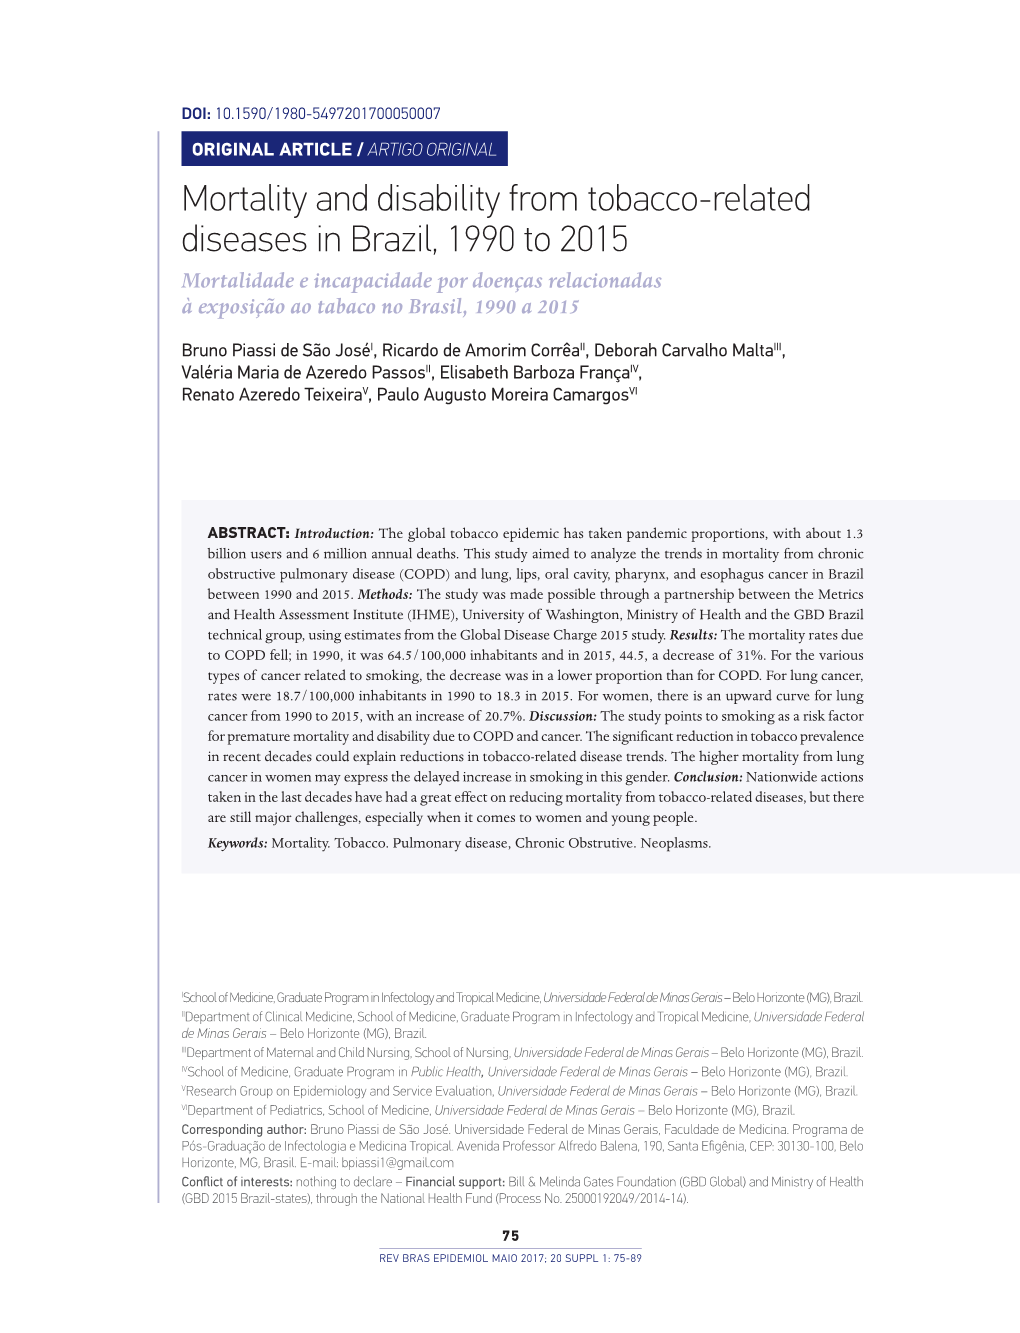 Mortality and Disability from Tobacco-Related Diseases in Brazil